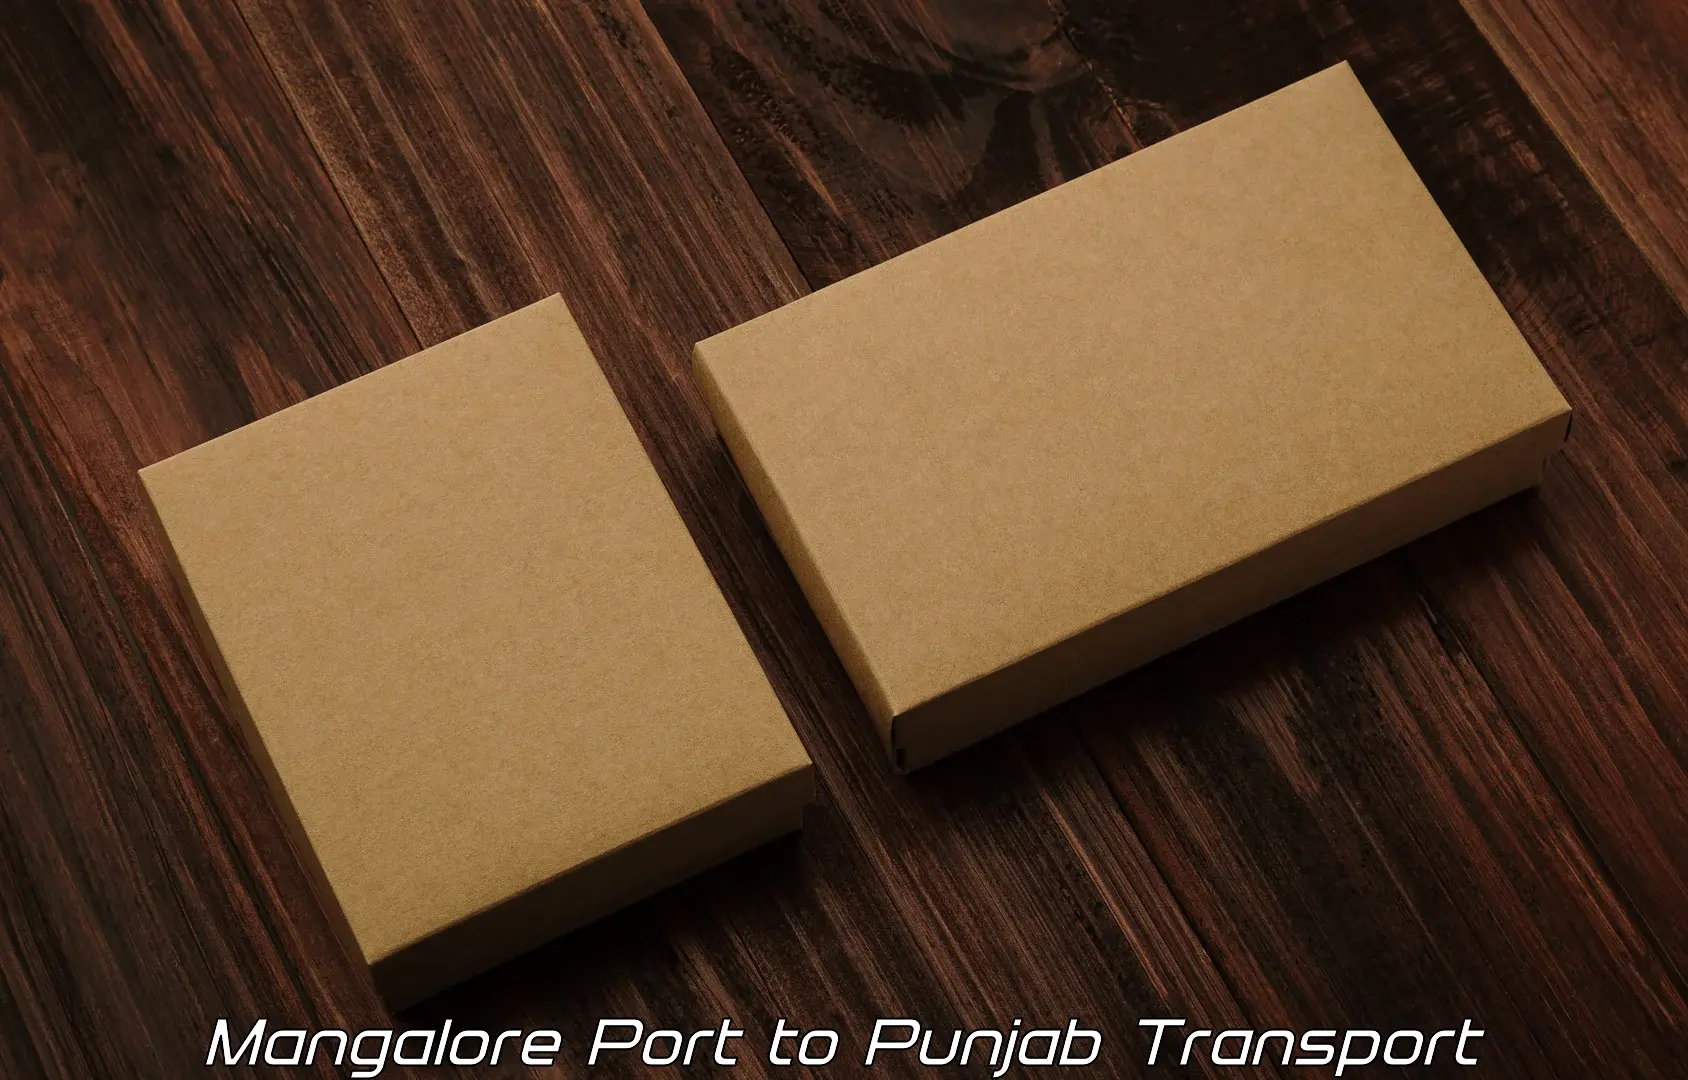 Delivery service in Mangalore Port to Nangal